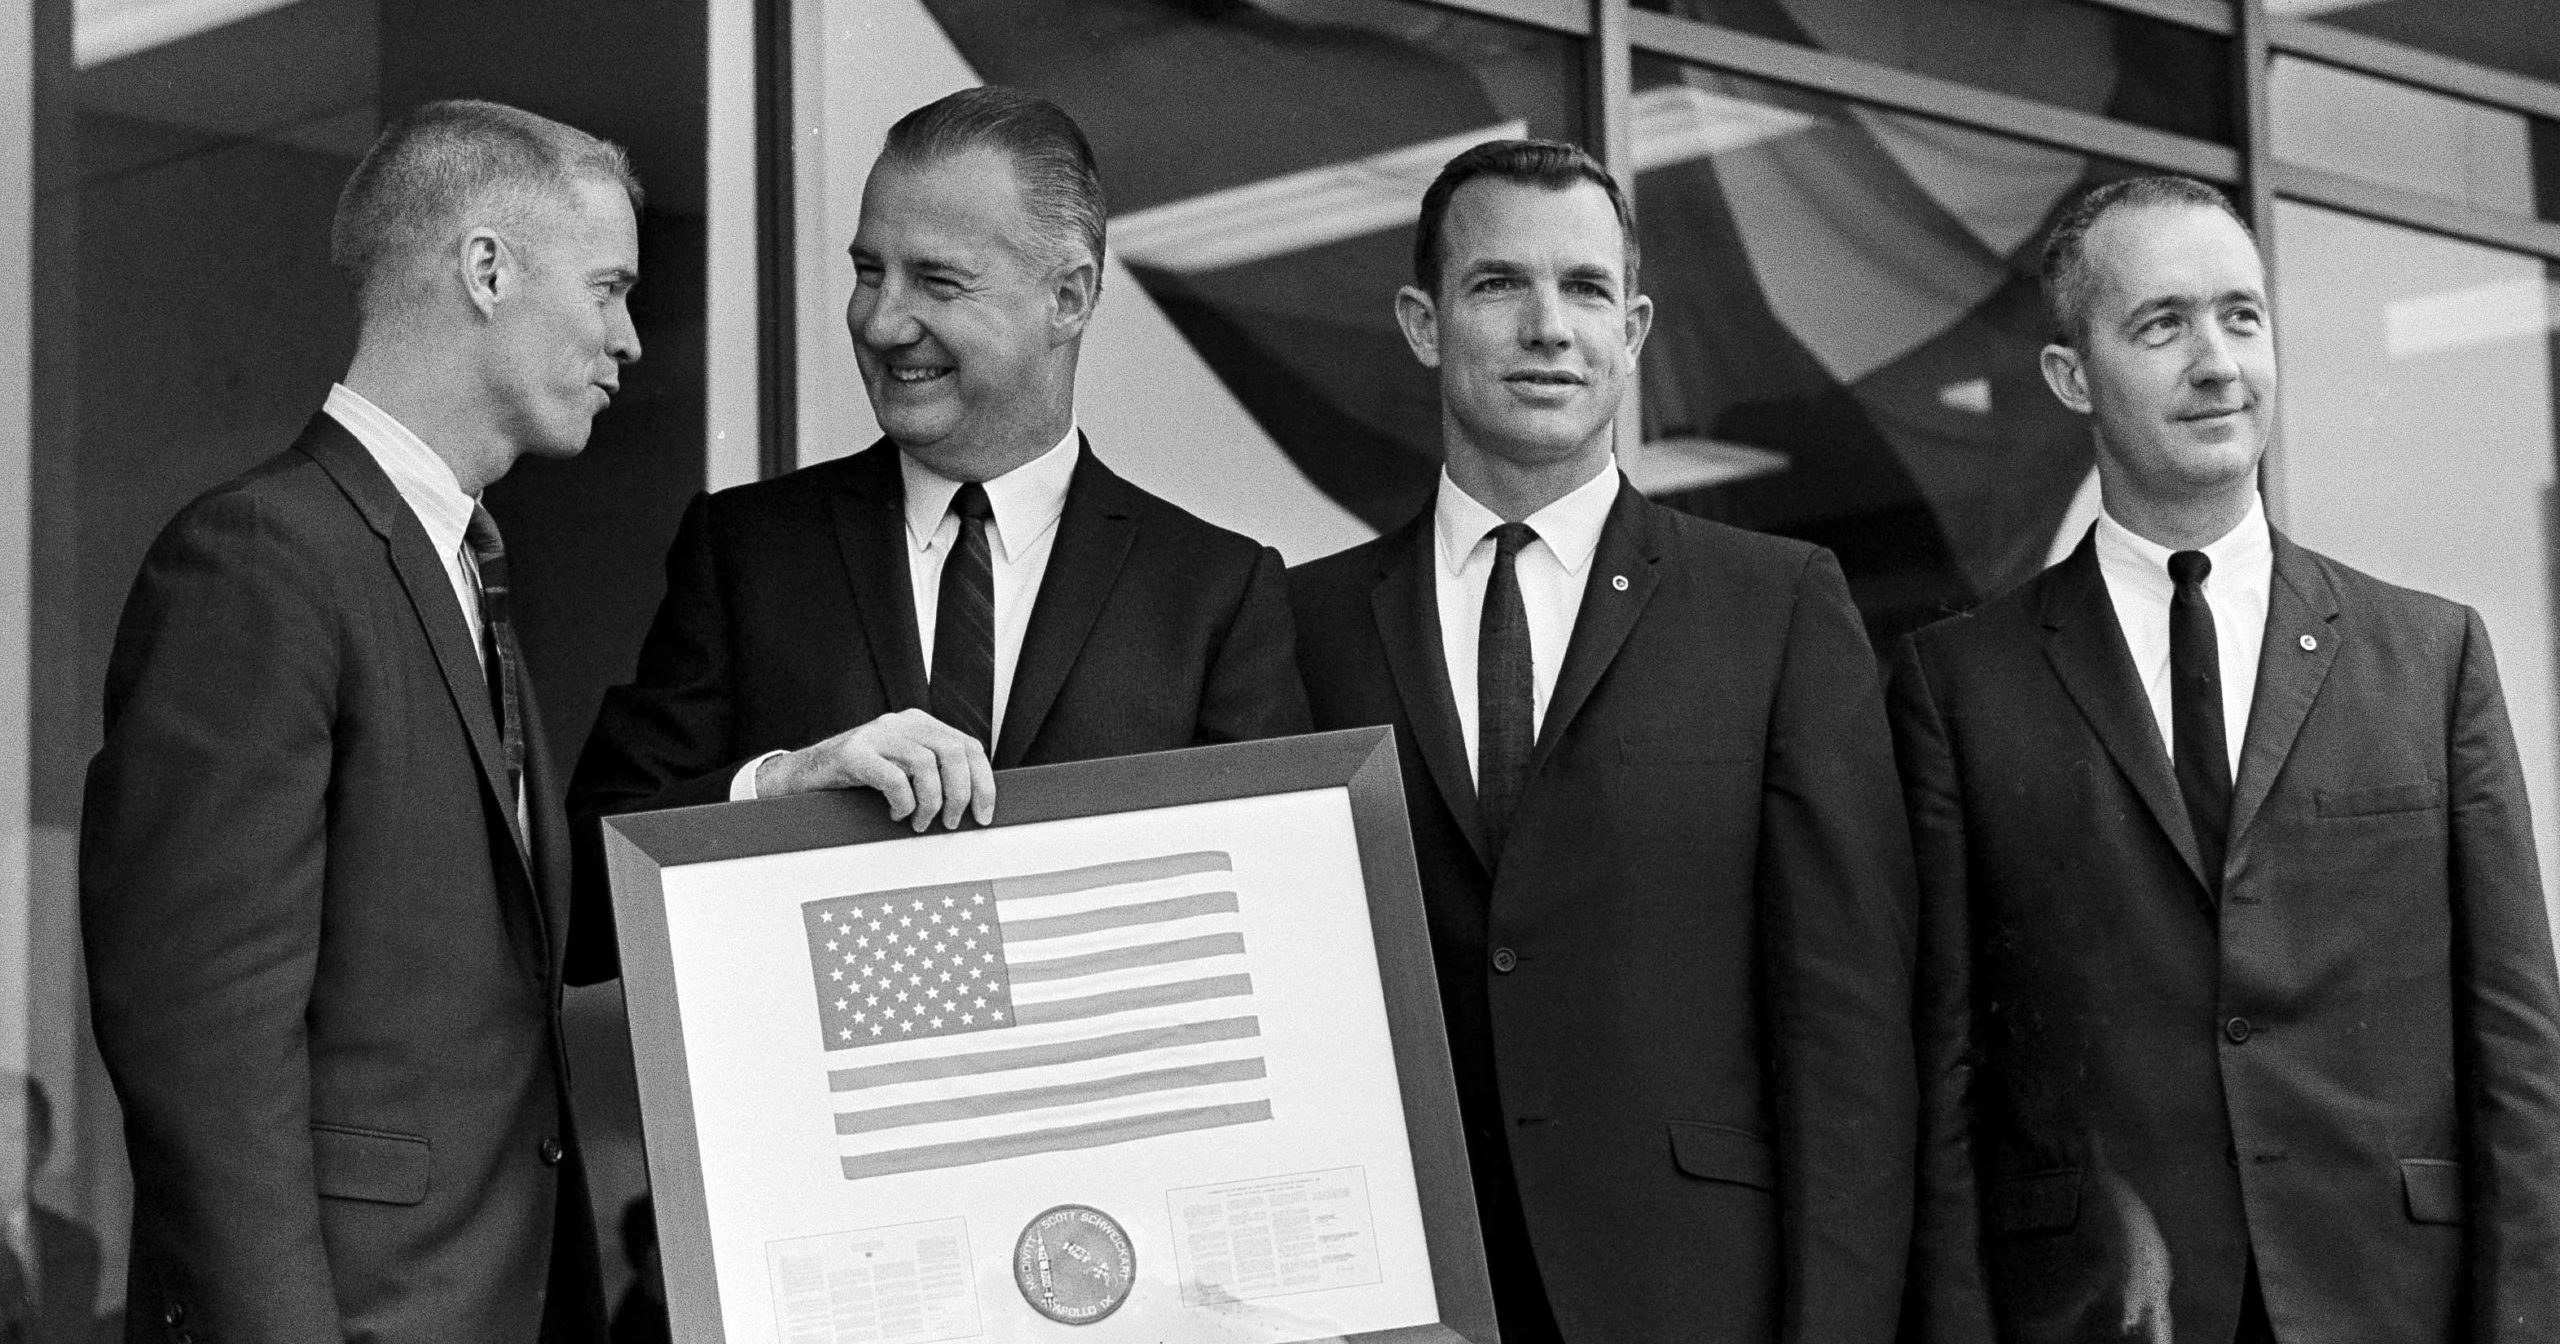 Vice President Spiro Agnew holds a framed American flag presented to him by the crew of Apollo 9, as he poses with the astronauts on March 29, 1969, in Washington. James McDivitt is on the right.